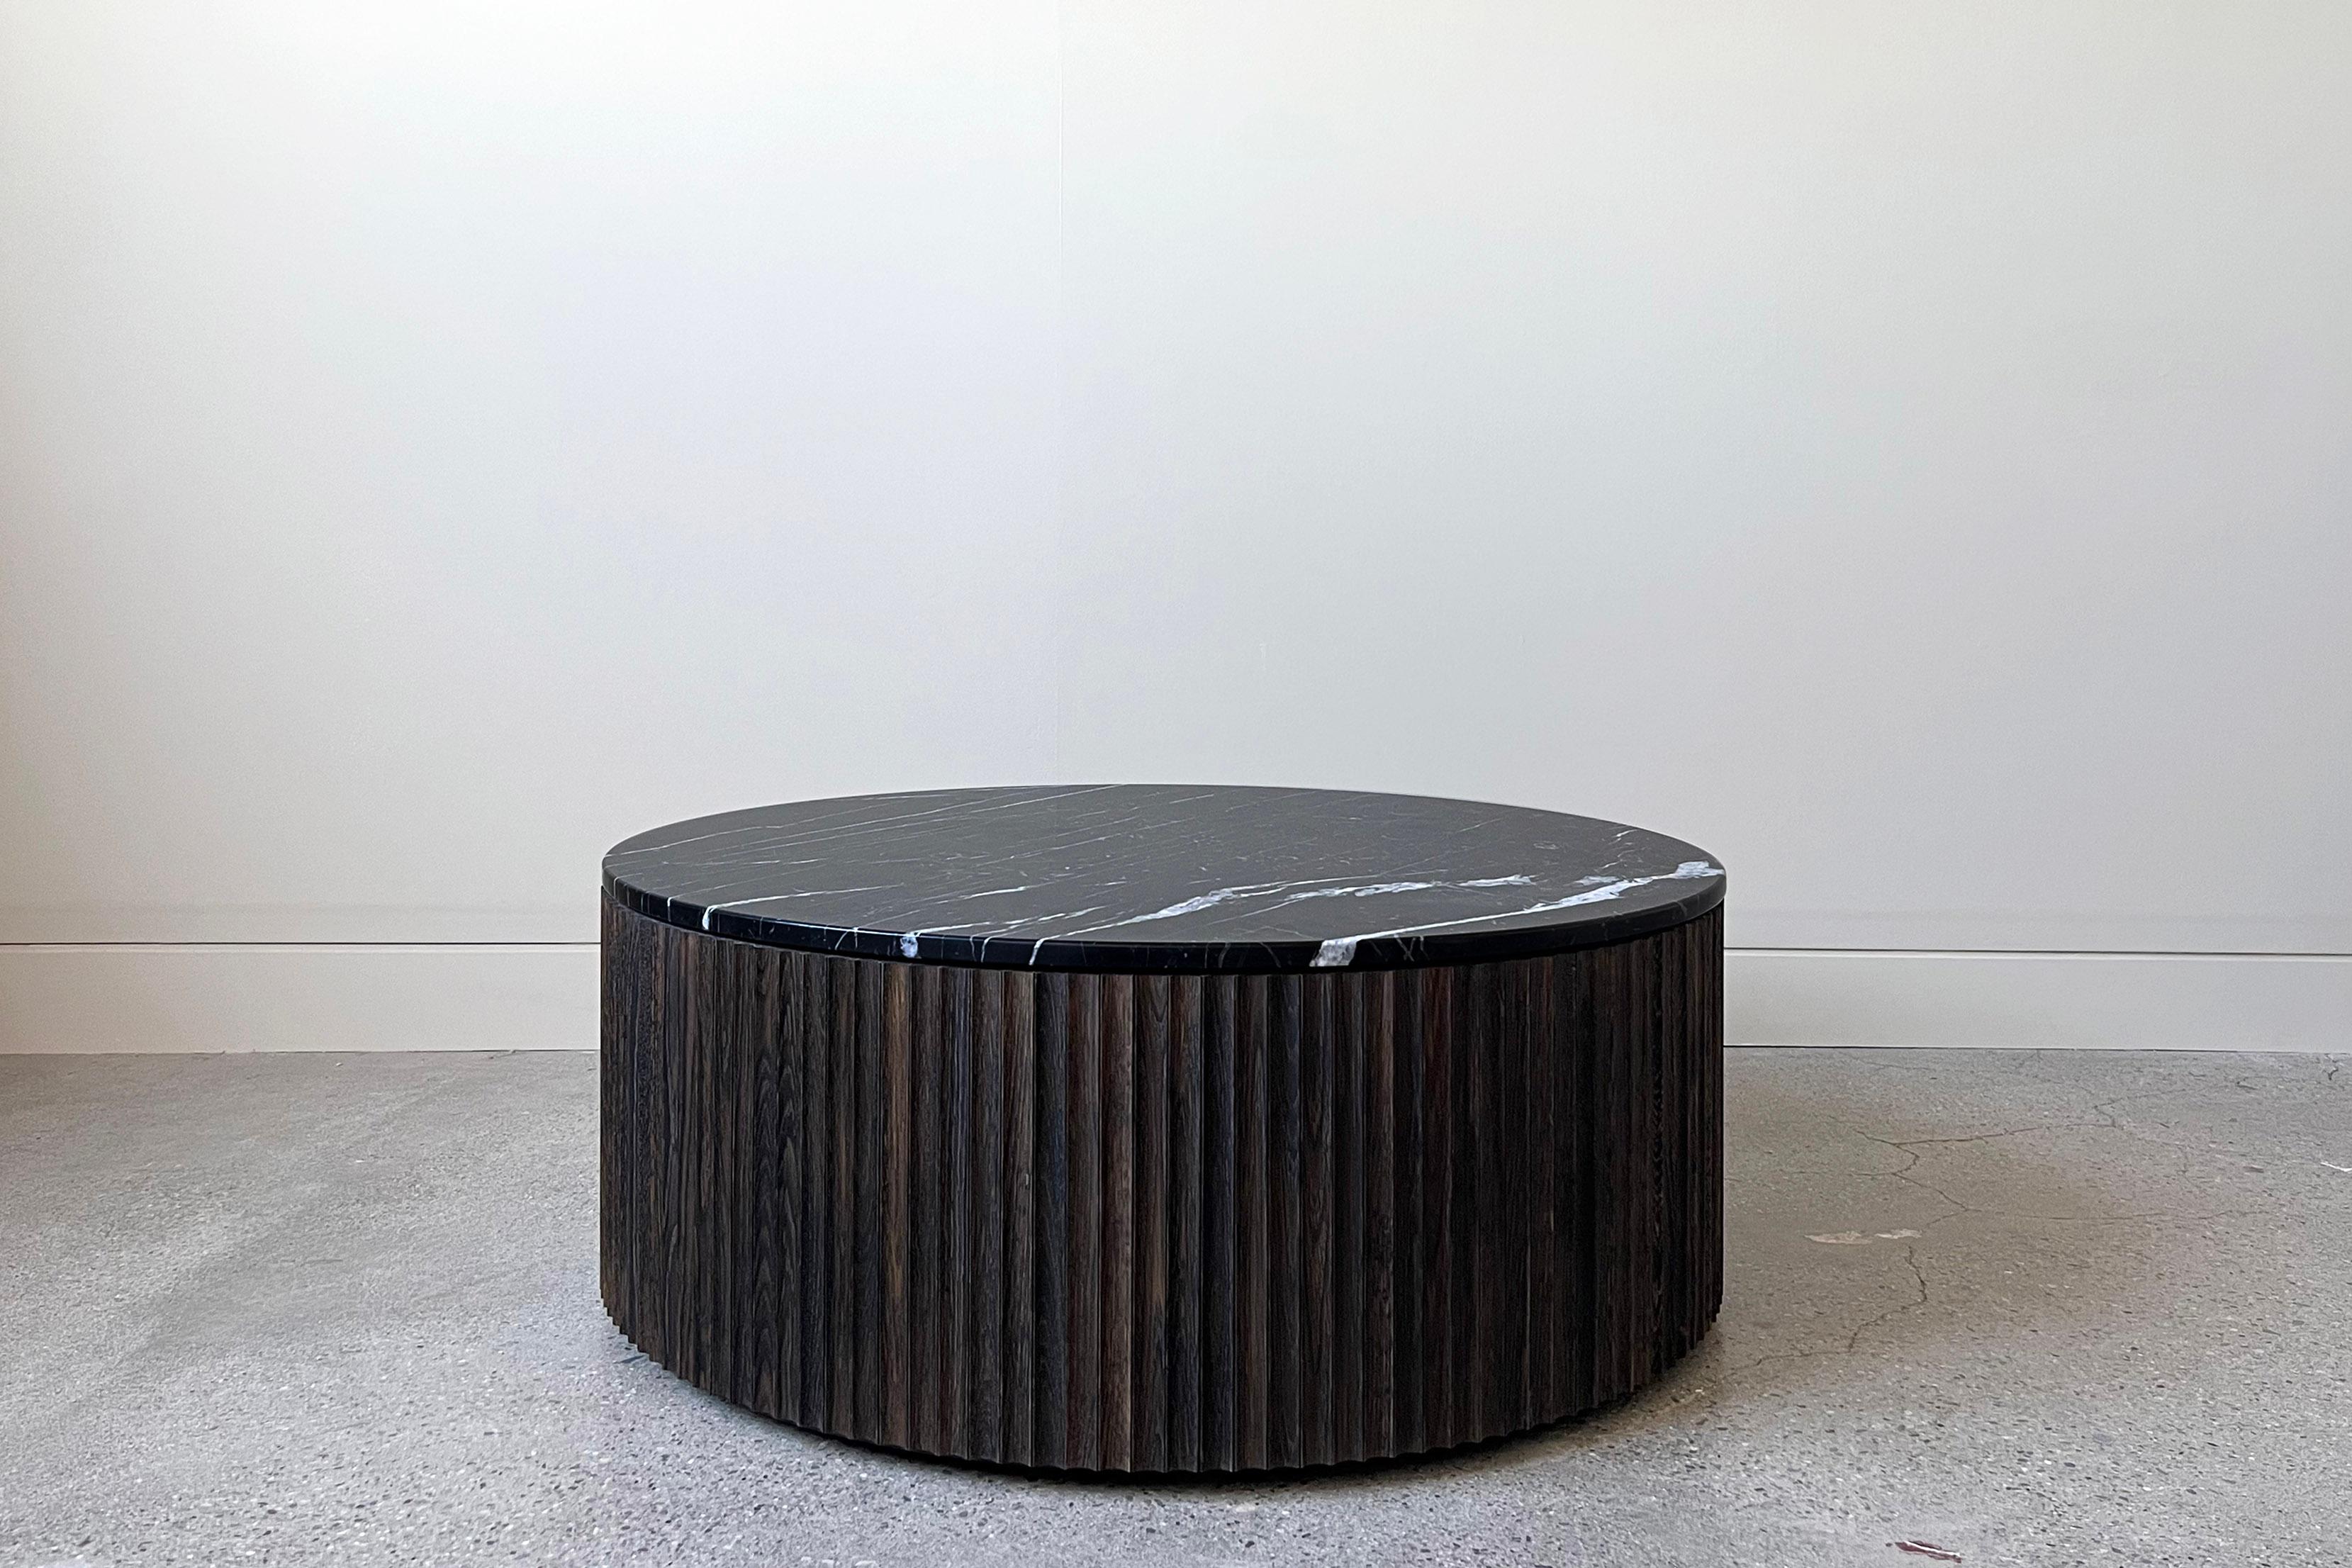 Pilar Round Coffee Table / Oxidized Oak Wood, Nero Marquina Marble Top by INDO- In New Condition For Sale In Rumford, RI